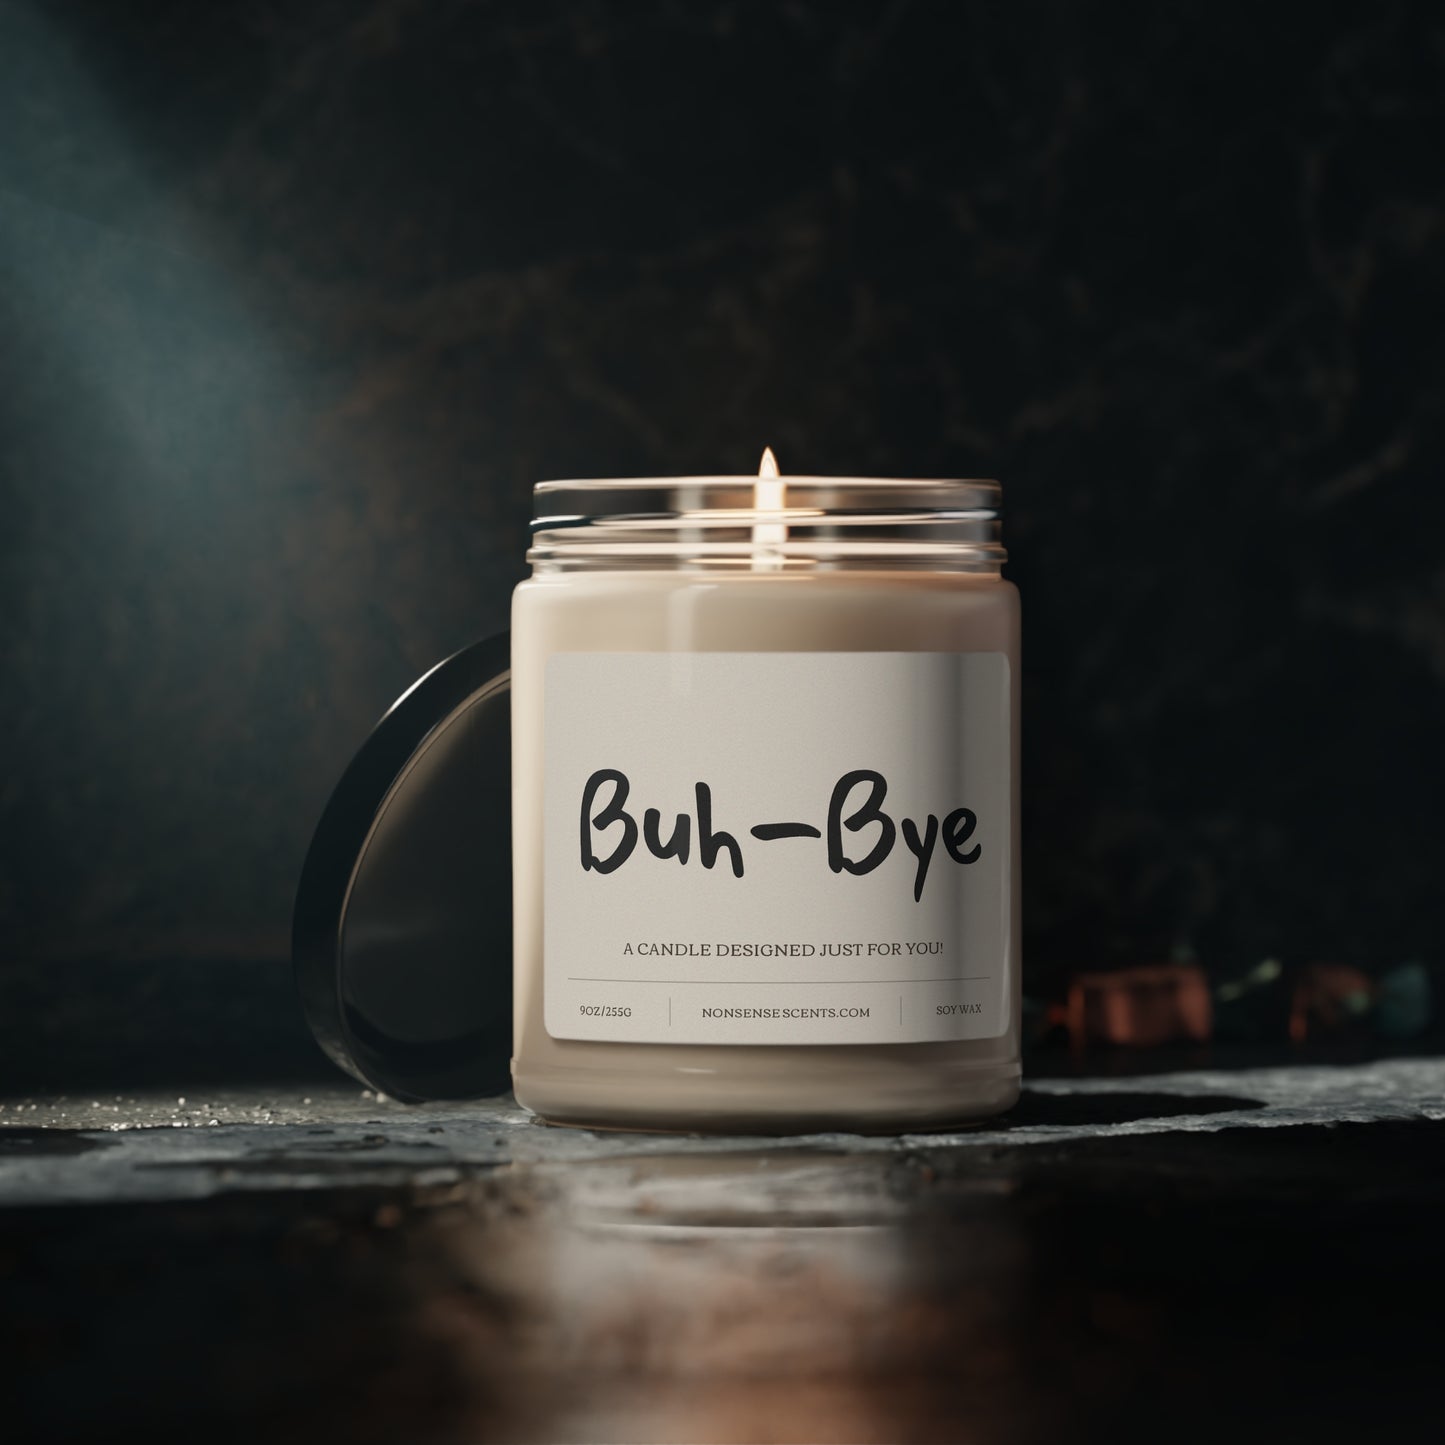 "Buh-Bye" Scented Candle